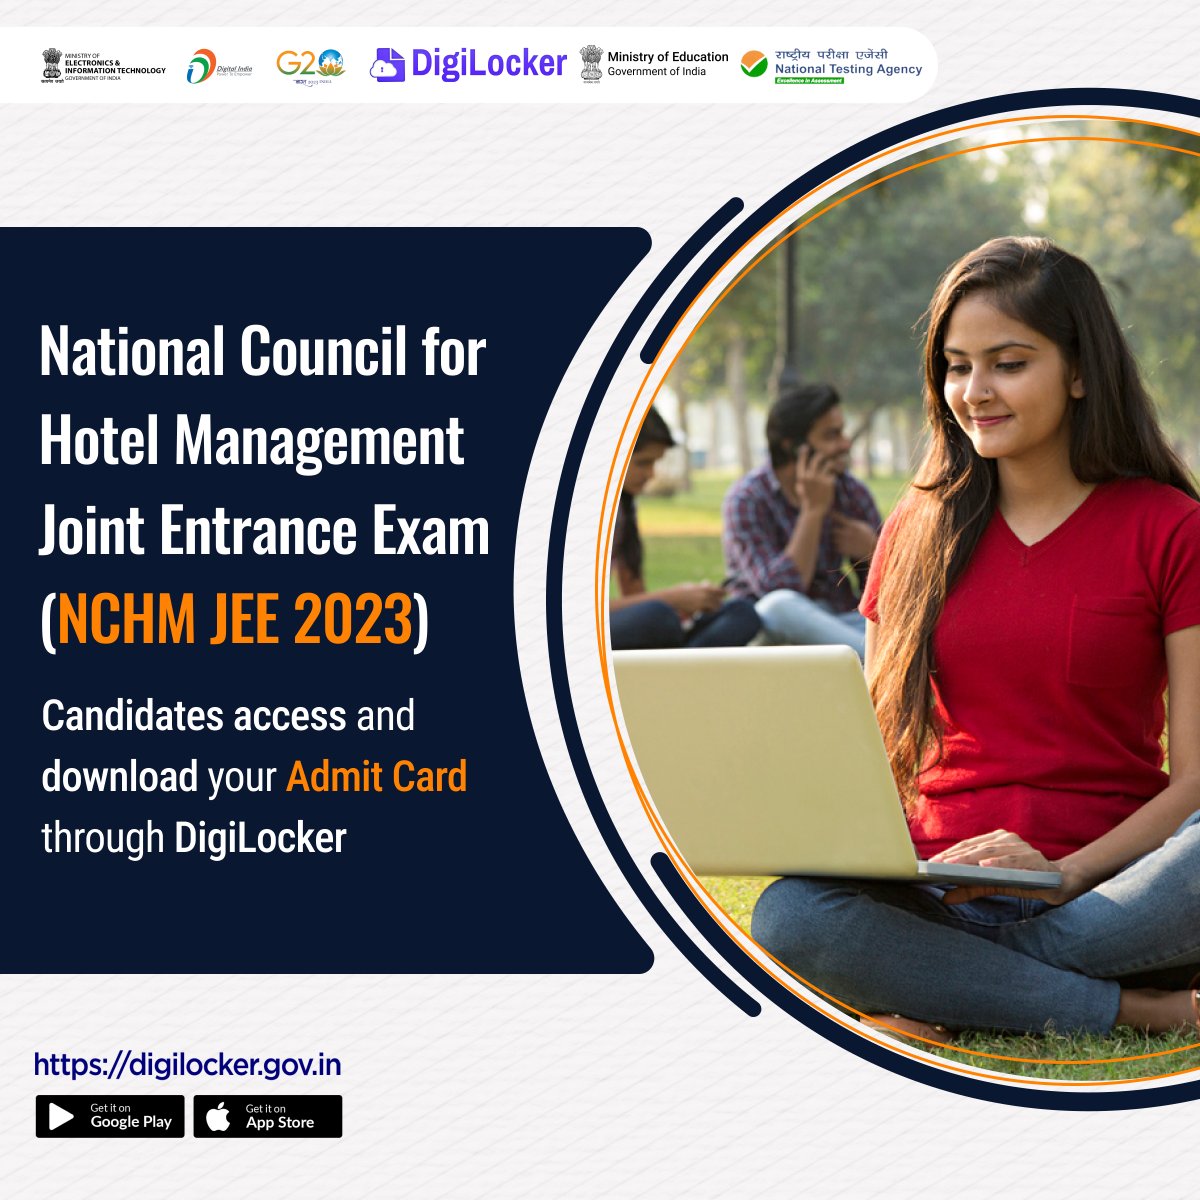 Good News for Candidates of National Council for Hotel Management Joint Entrance Exam (NCHM JEE 2023) Now Access and Download your Admit Card hassle free, anytime, anywhere through #DigiLocker #NCHM #JEE2023 #NTA